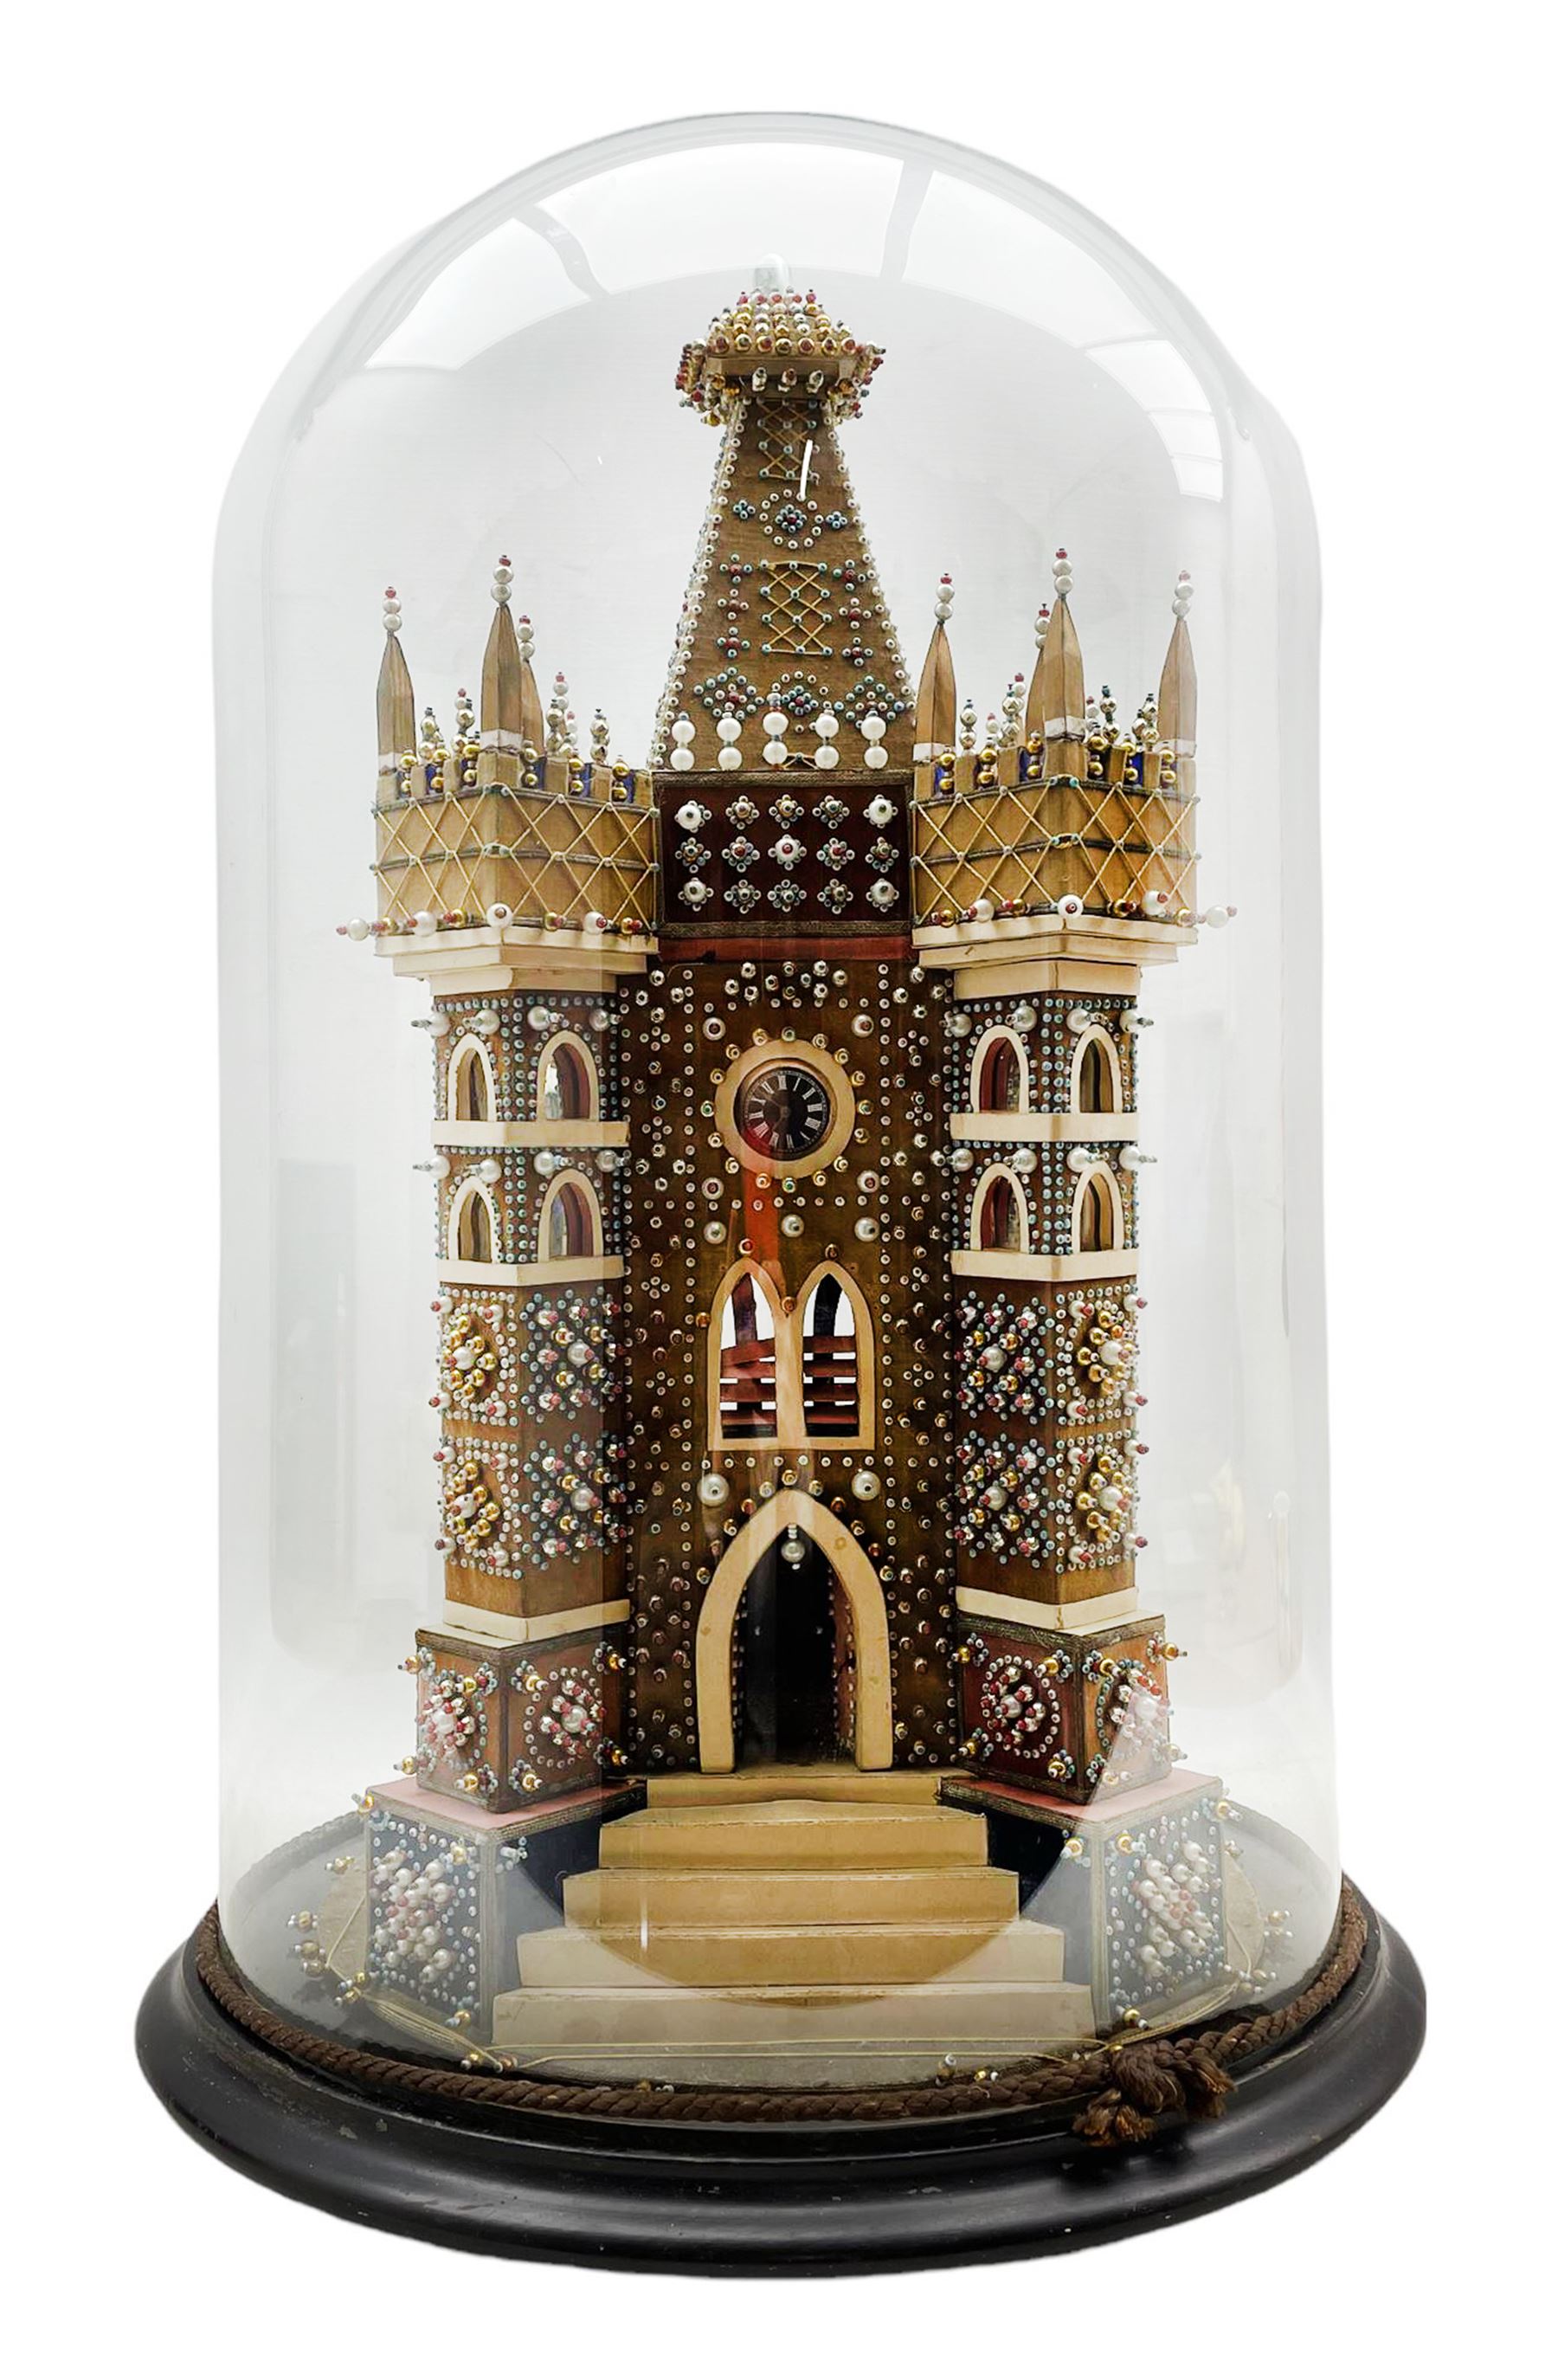 Edwardian velvet and beadwork model of a Church tower dated 1910